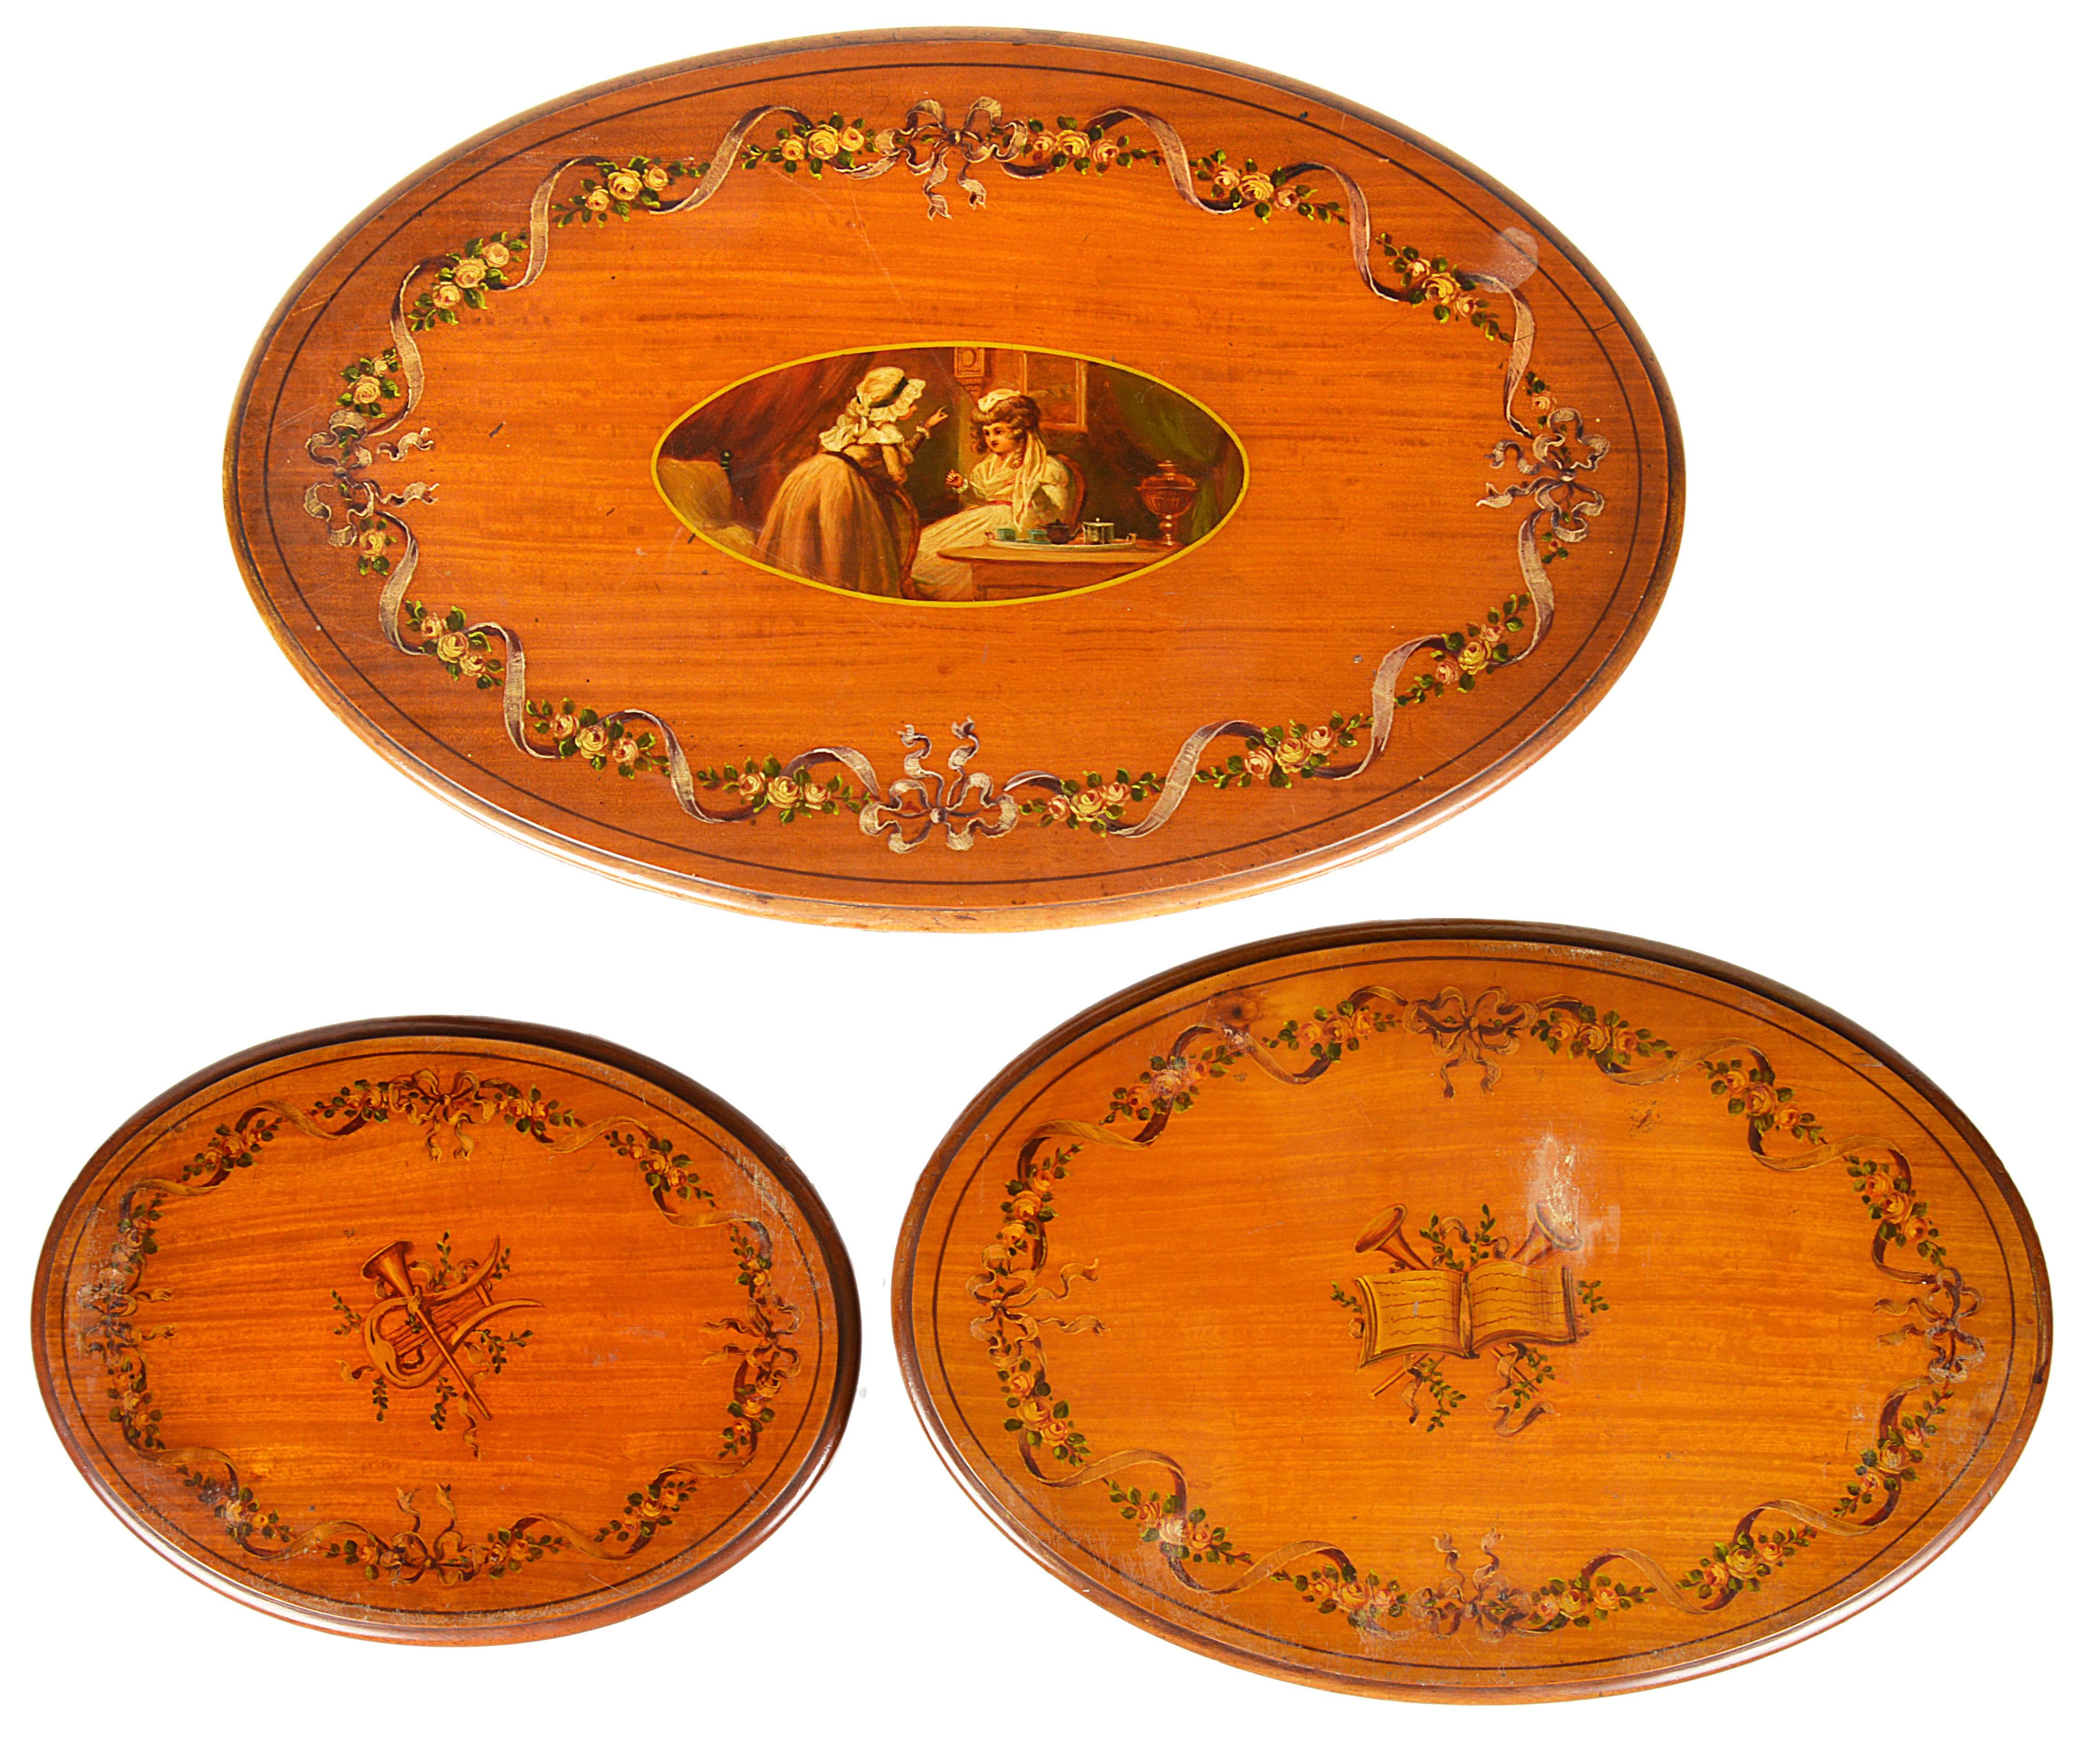 A good quality nest of three Sheraton Revival oval satinwood tables, each with hand-painted classical decoration.